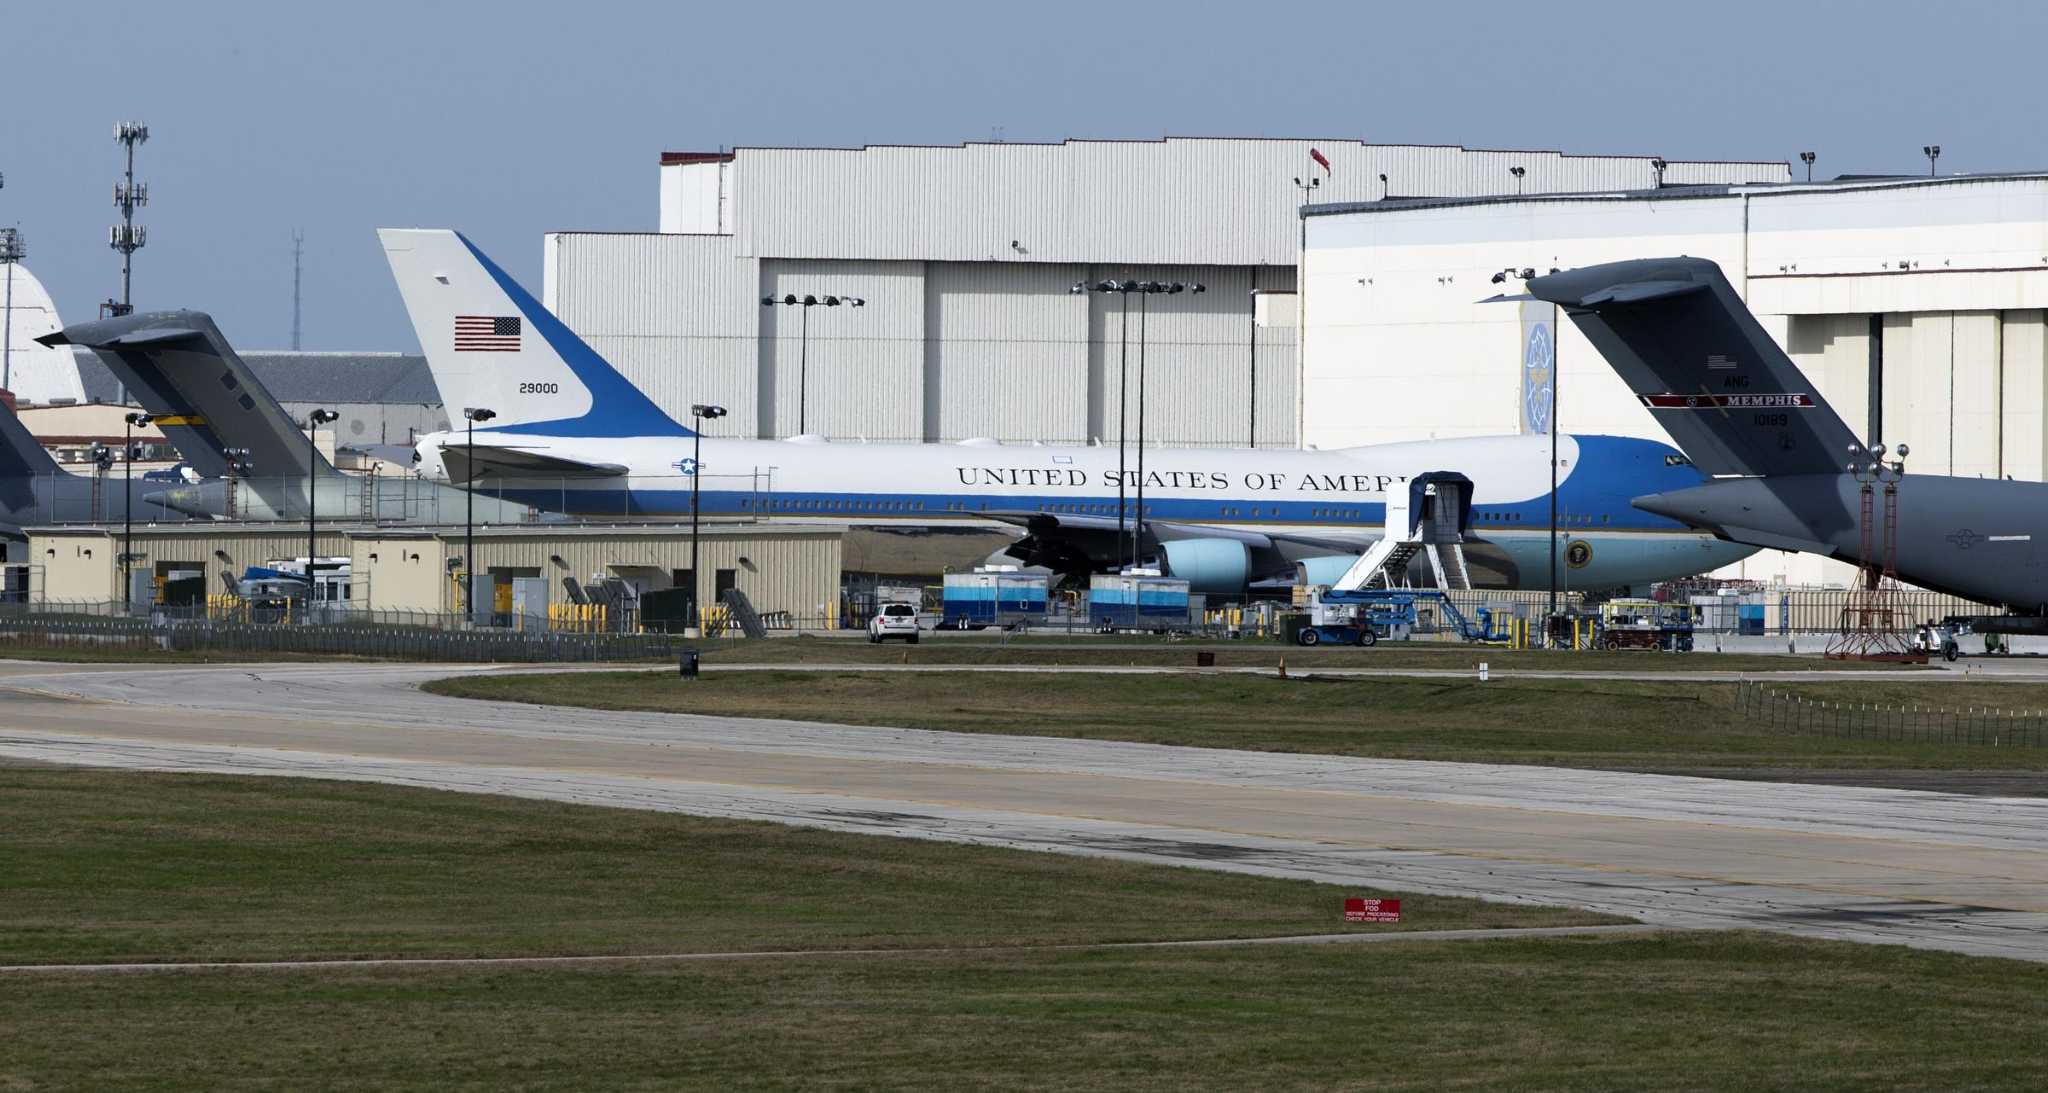 Boeing losses mount on troubled Air Force One program